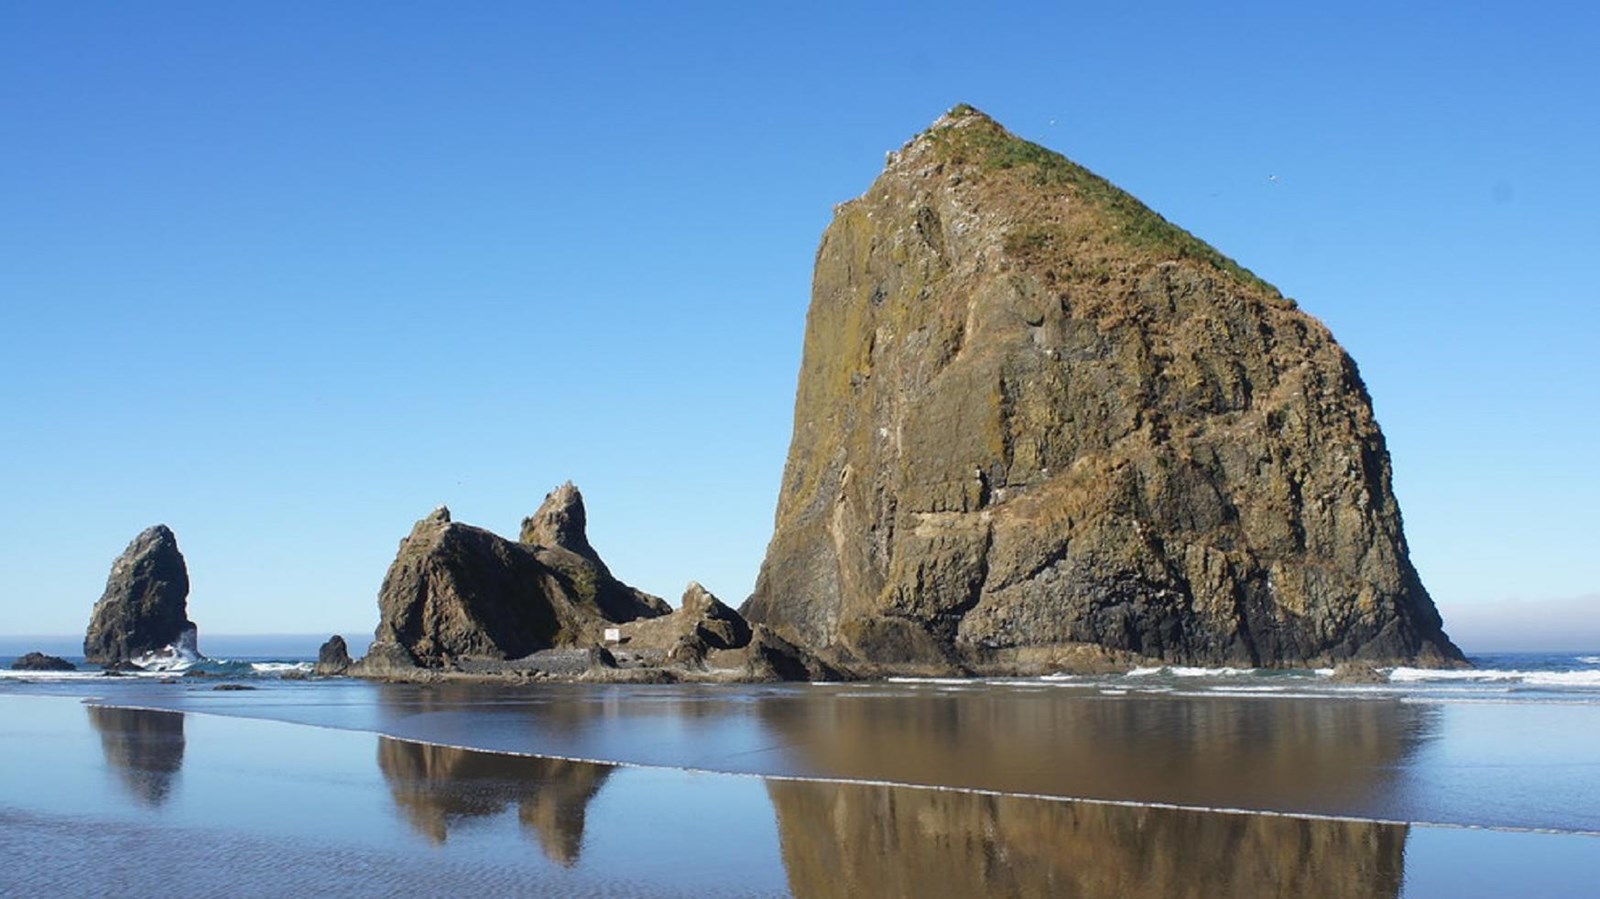 Haystack Rock at Cannon Beach Enormous basalt rock formations rise from the shore at low tide against a blue sky